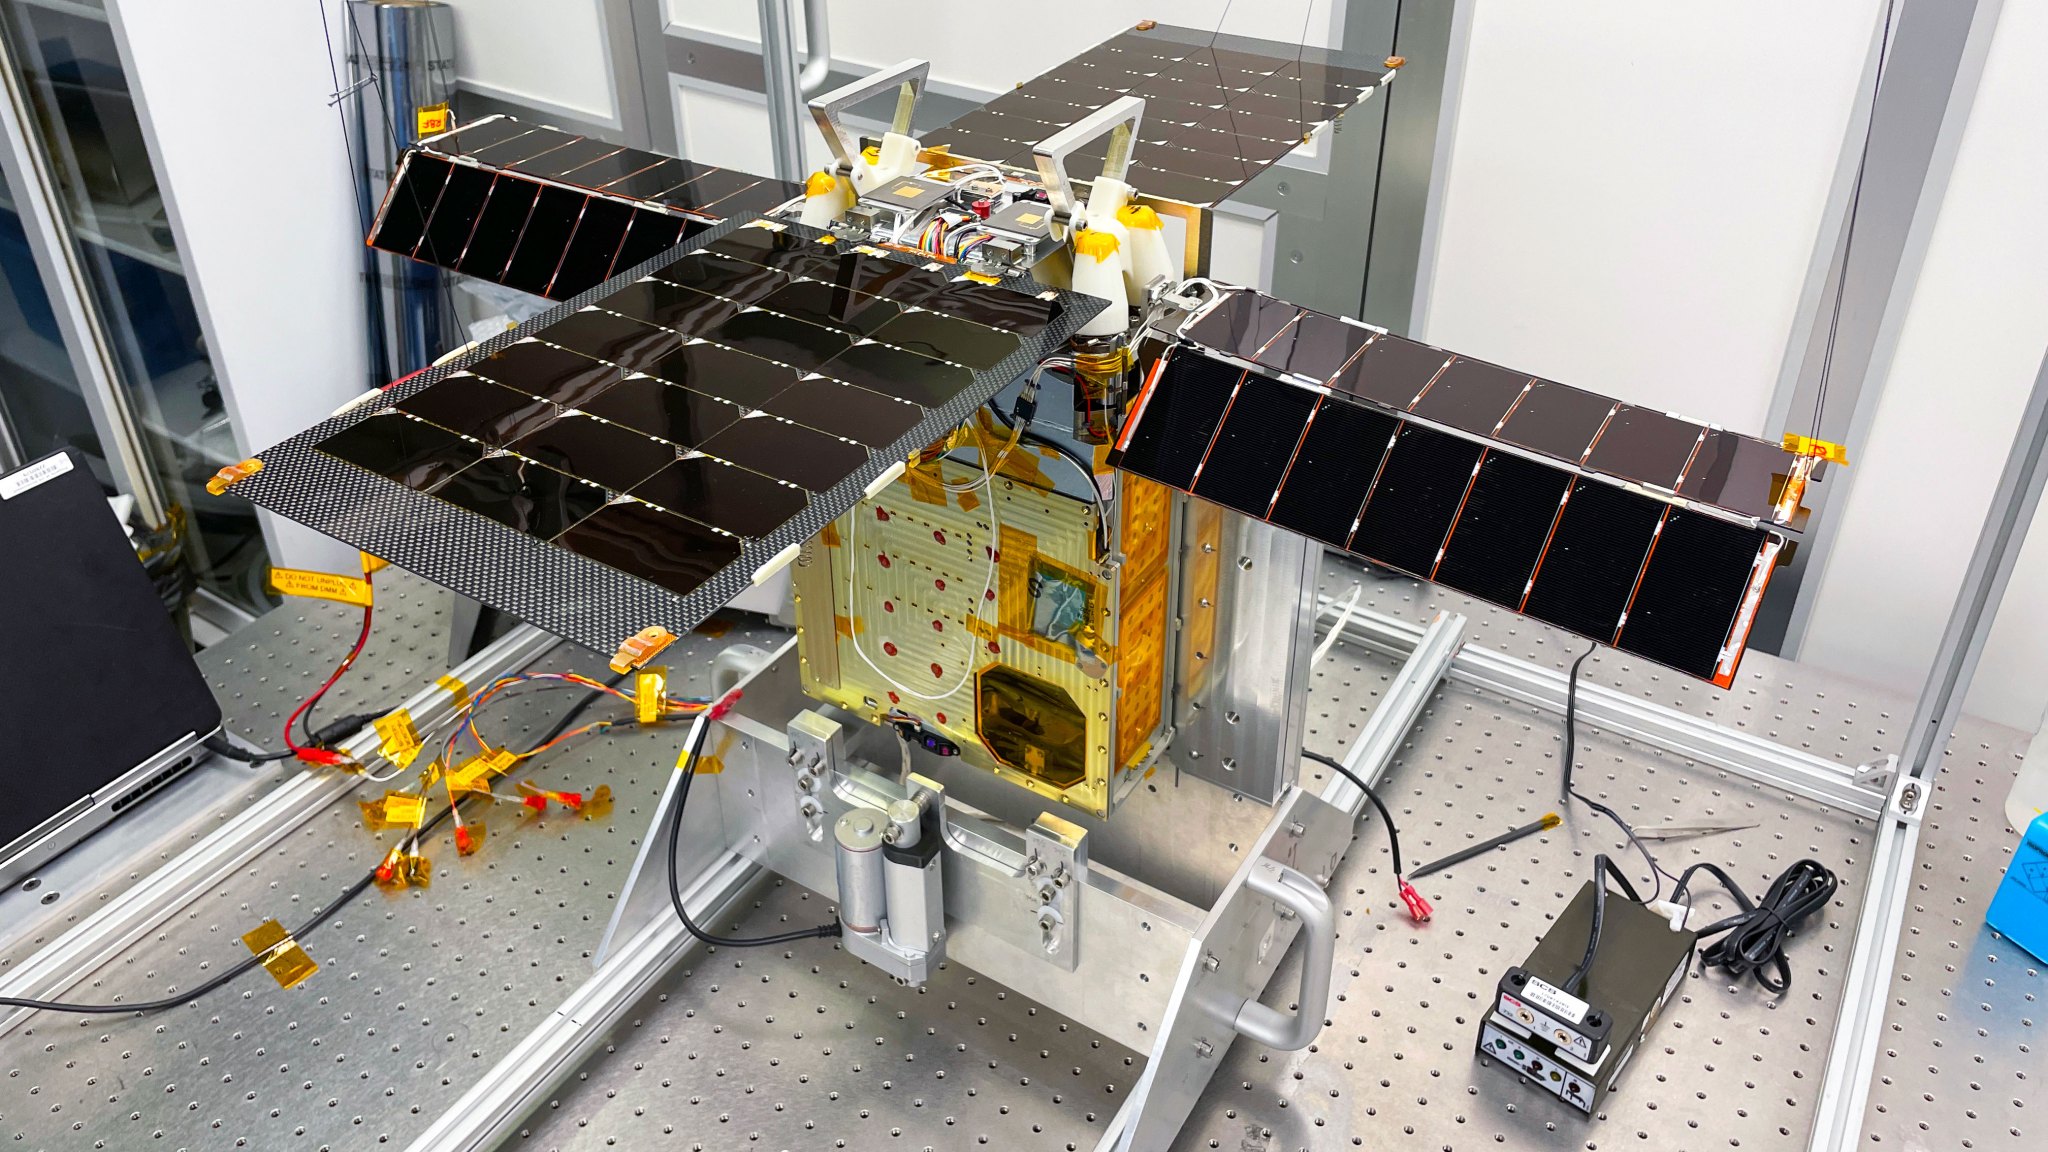 Earlier this year, NASA’s Lunar Flashlight mission underwent tests to prepare it for launch in November 2022. The solar-powered small satellite is shown here with its for solar arrays extended in a Georgia Tech clean room.